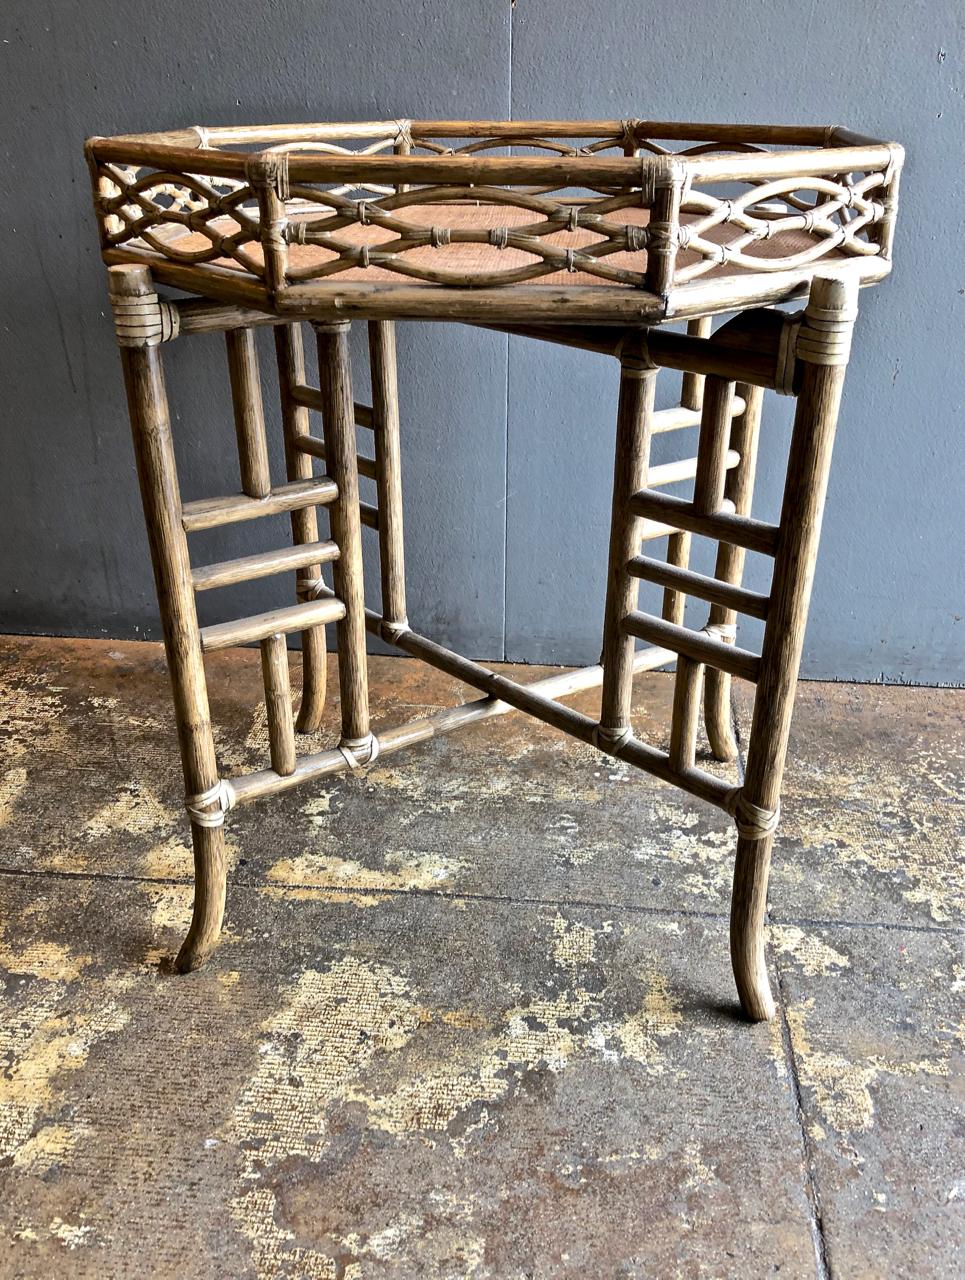 This is a very chic McGuire bamboo and cane tray detailed with fretwork that sits on a folding bamboo stand. This little table would integrate into many design scenarios from traditional to cottage to midcentury. The table most probably dates to the